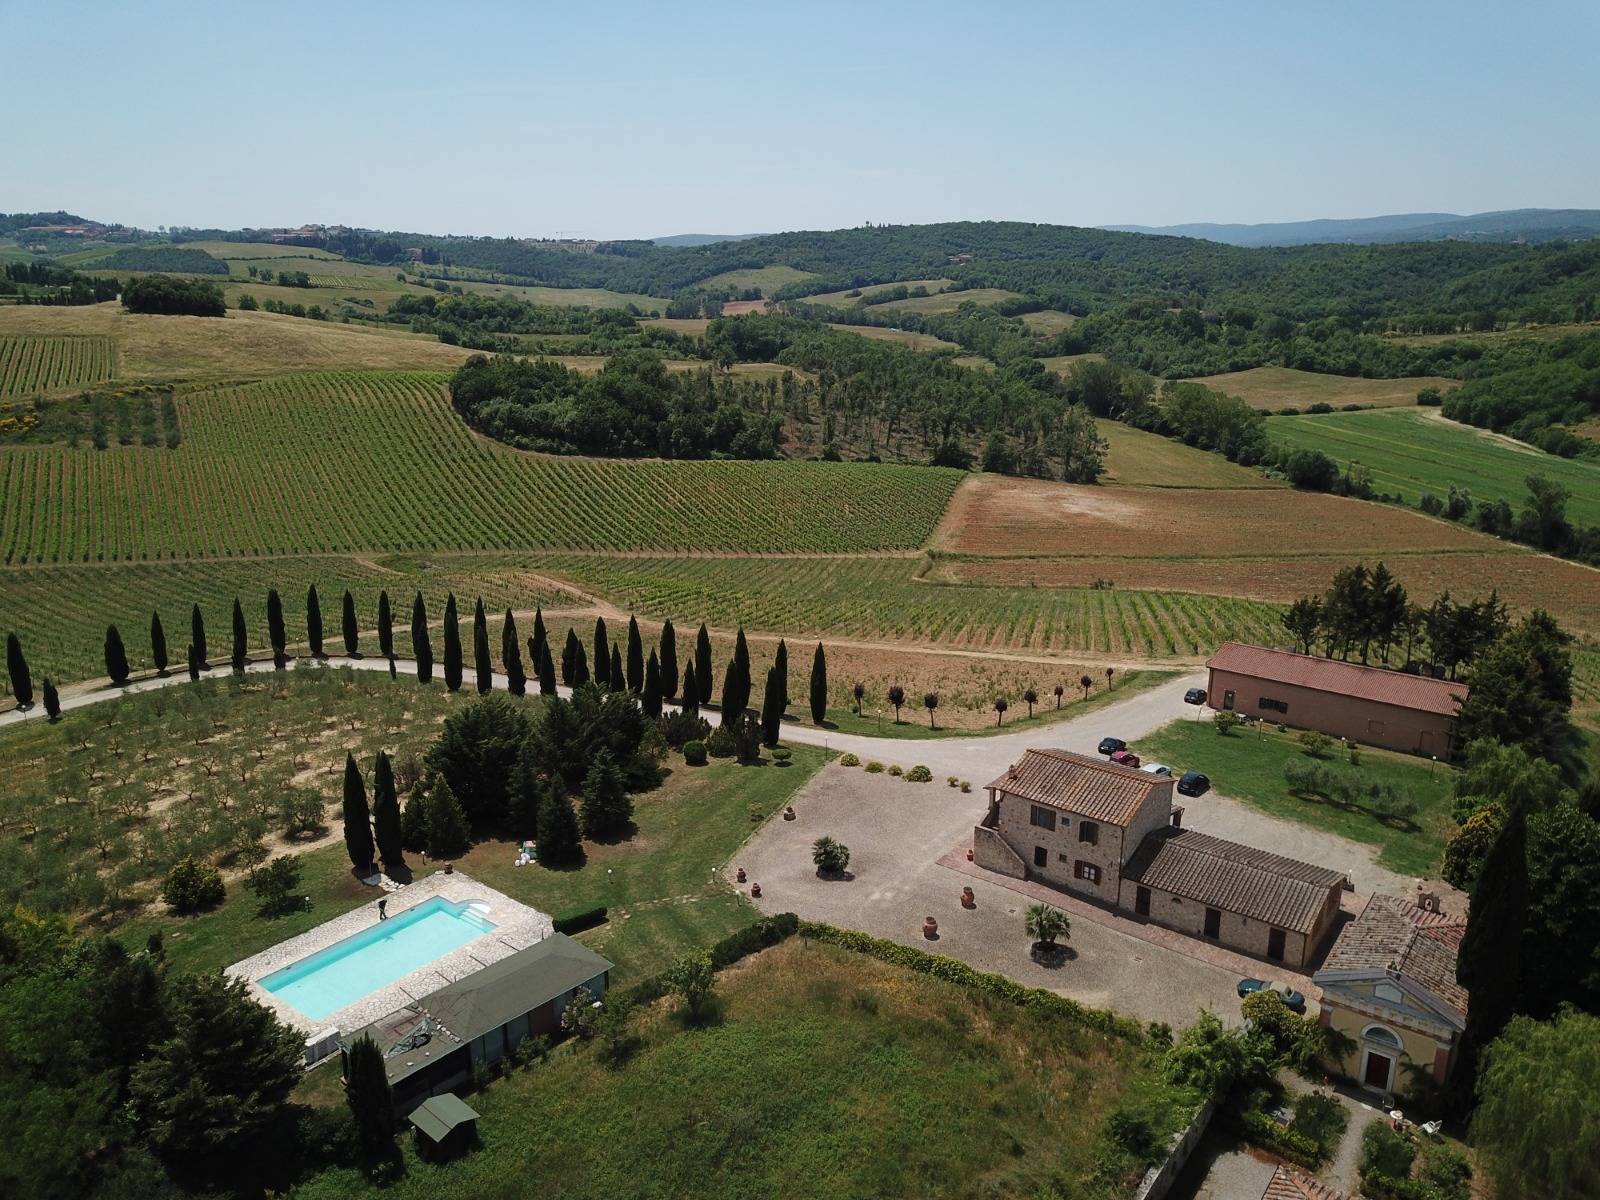 Farmhouse and Vineyard in the Hills of Chianti